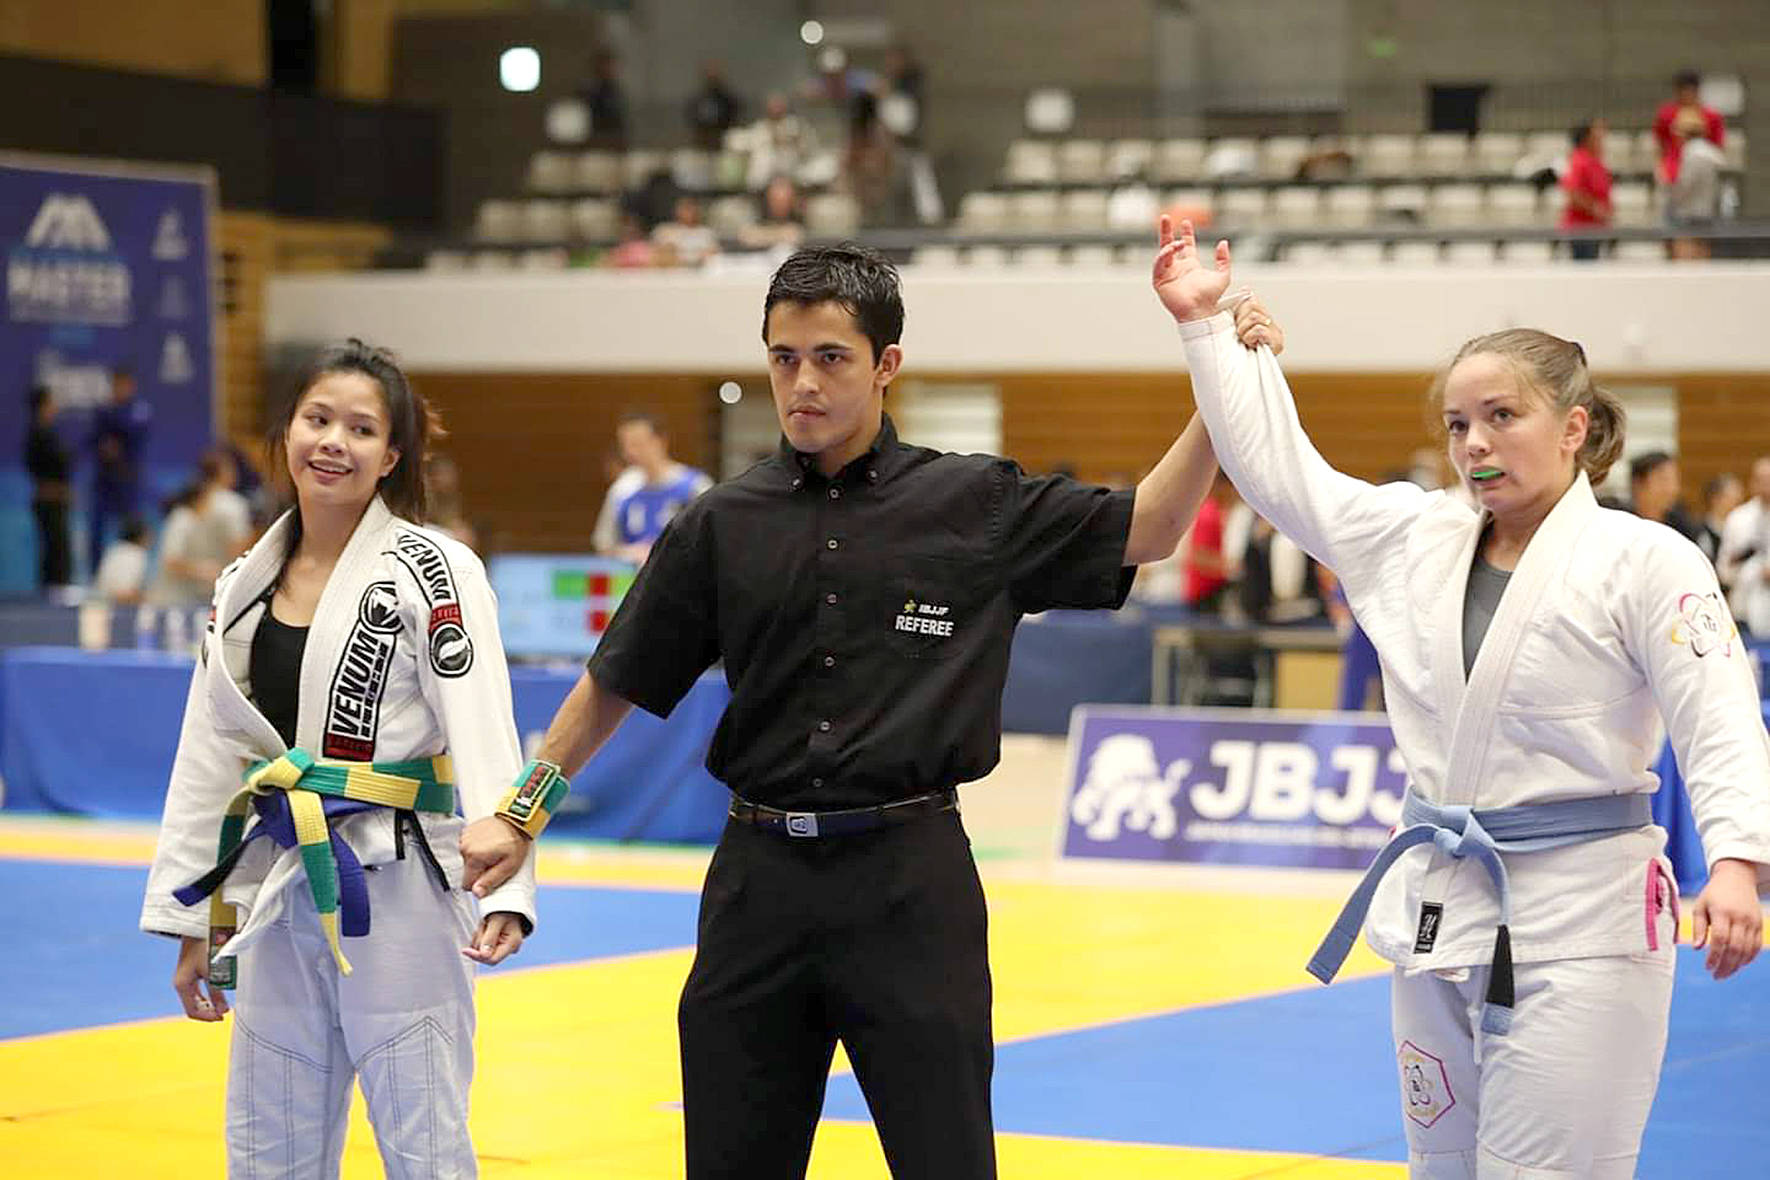 Courtney Anaya, 32, Renton, is named the winner during her match at the International Brazilian Jiu Jitsu Federation’s Tokyo Open on June 15. Photos submitted by Renton Martial Arts Center.